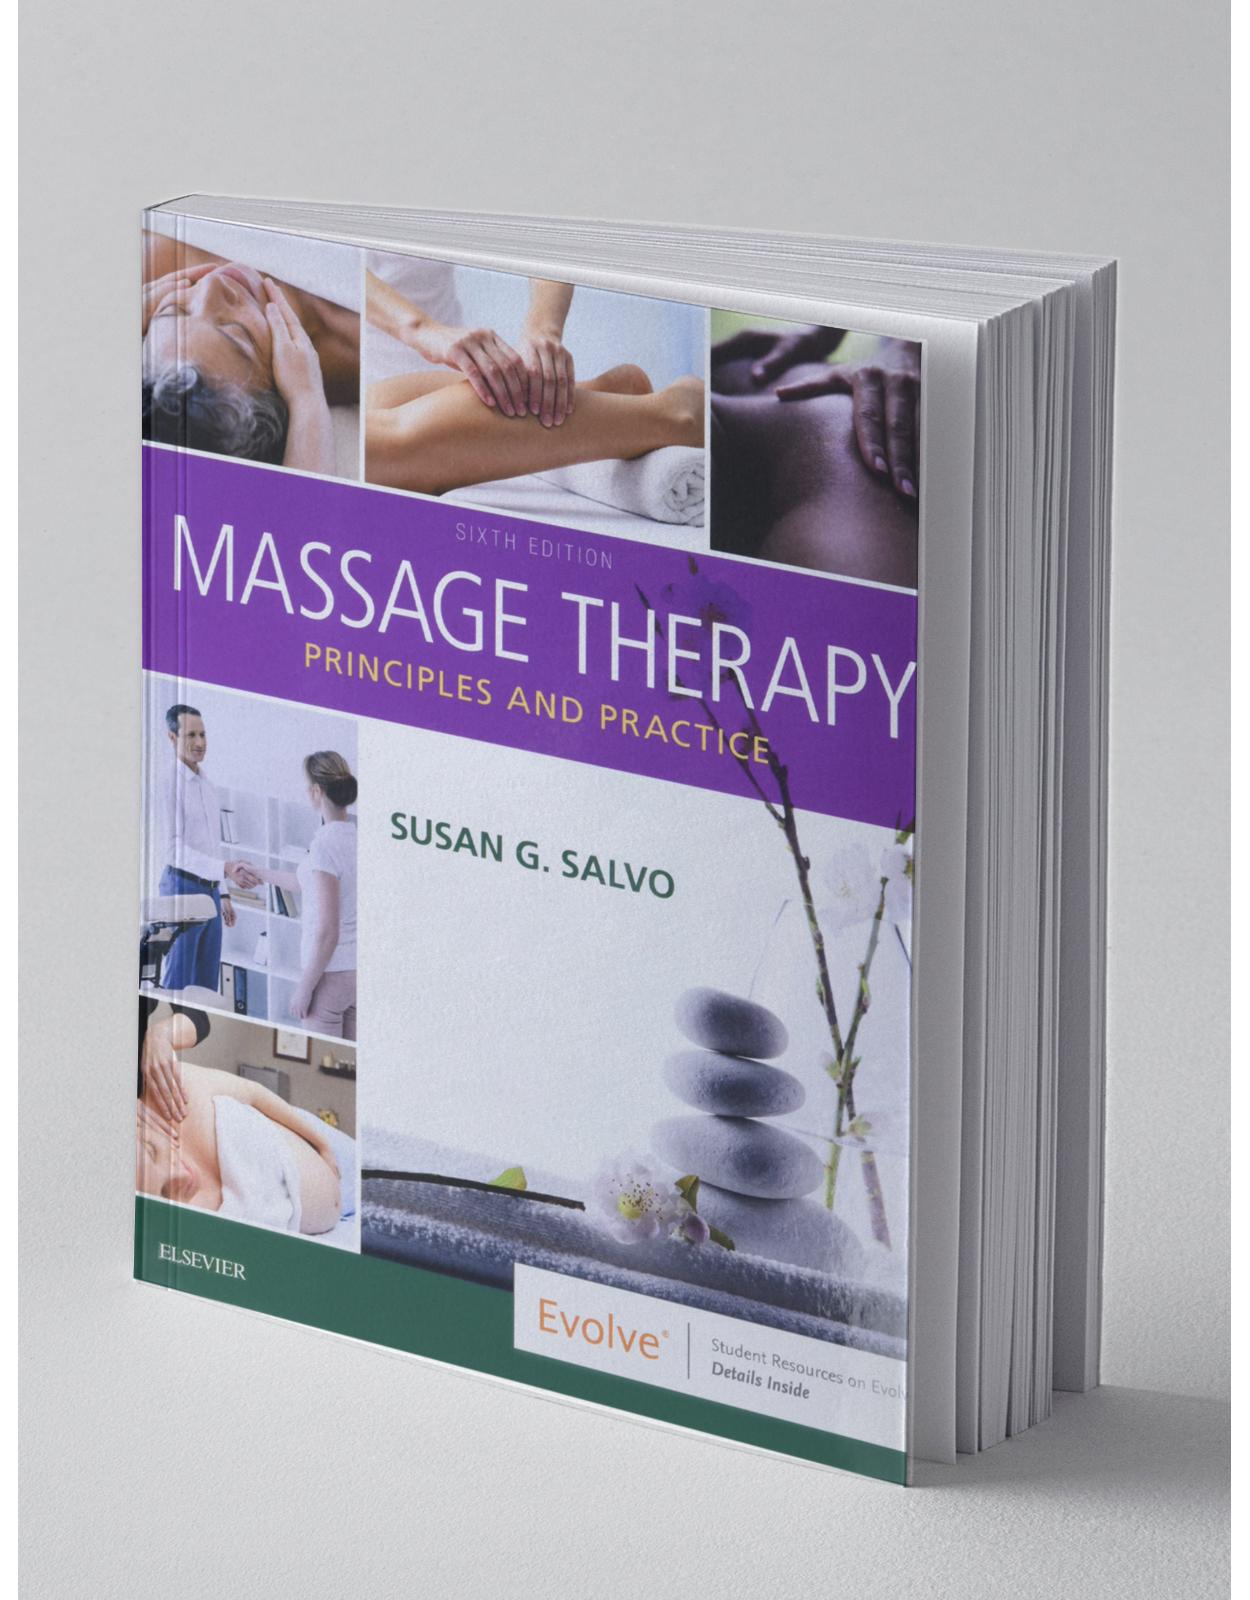 Massage Therapy: Principles and Practice, 6e